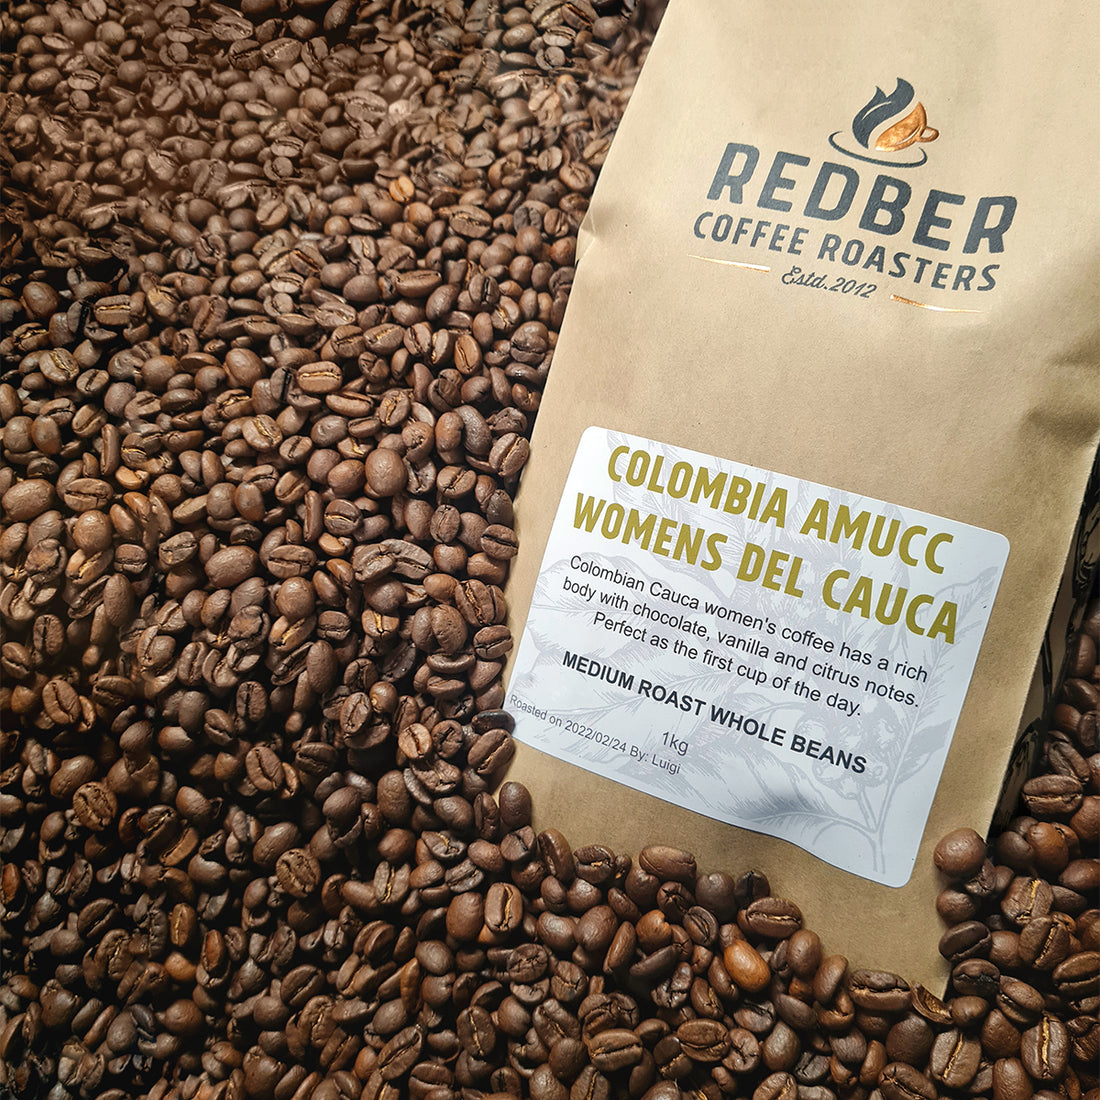 Redber Coffee, Surprise Me! Coffee Subscription - Lighter Coffee, Redber Coffee